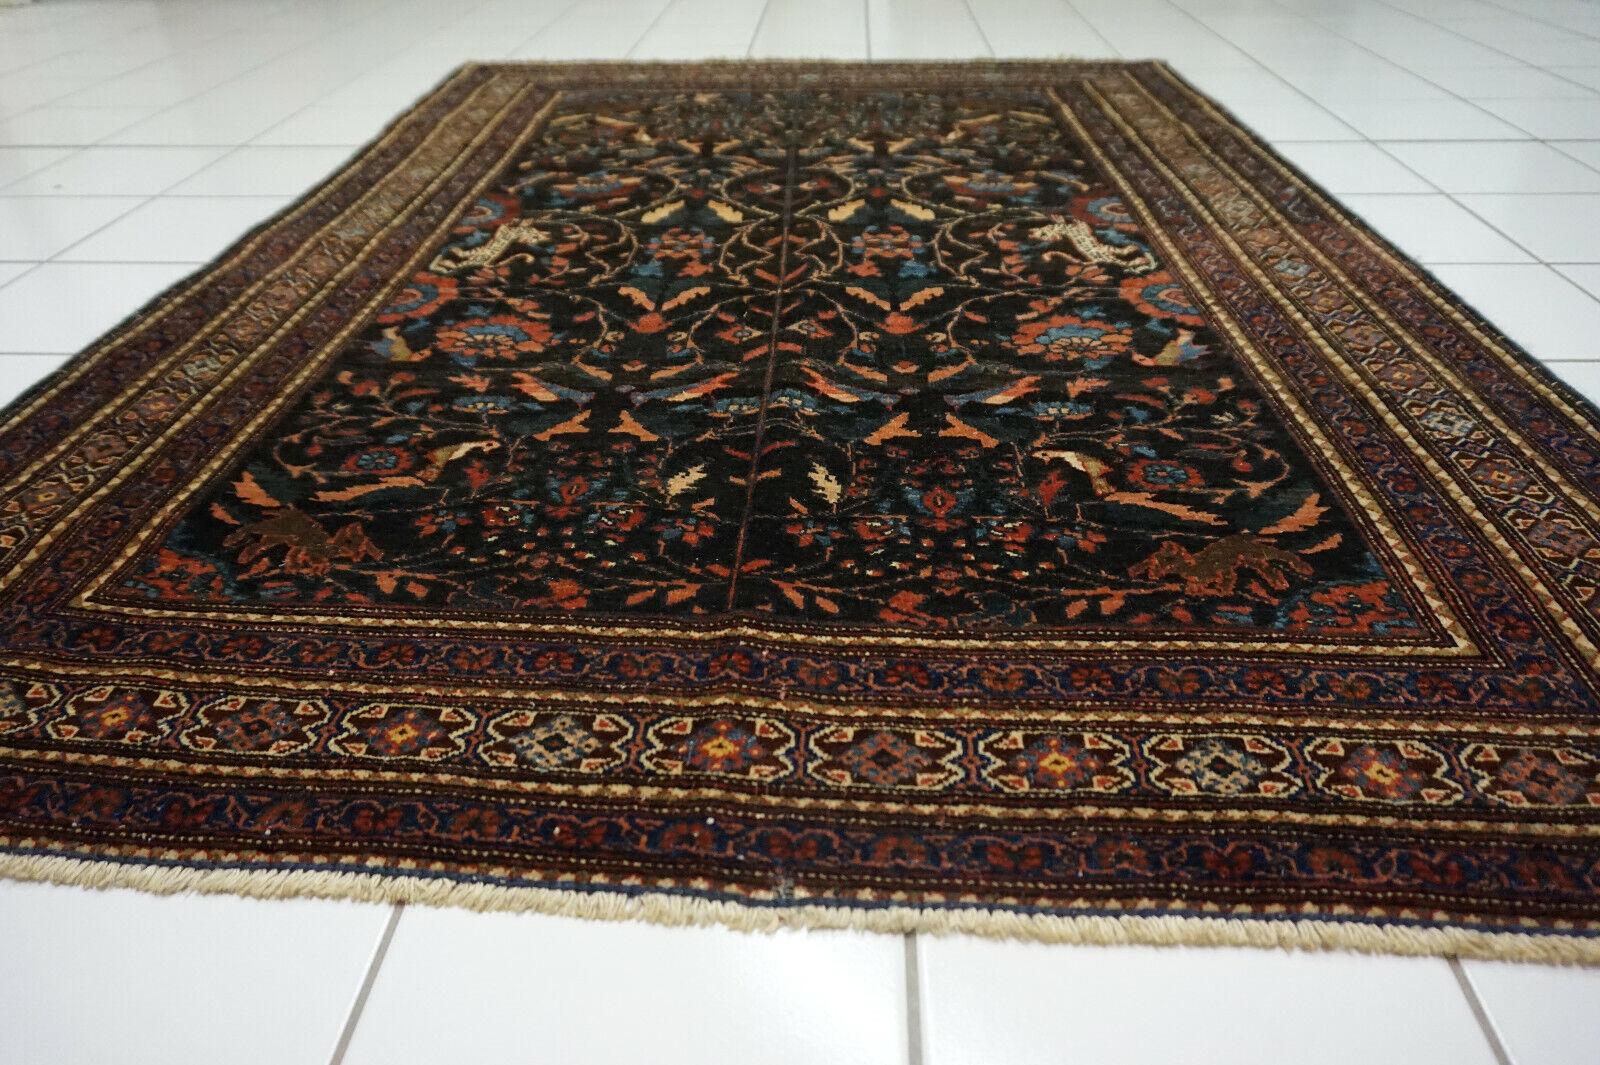 Handmade Antique Persian Tehran Rug 3.6' x 5.1', 1920s - 1D59 In Good Condition For Sale In Bordeaux, FR